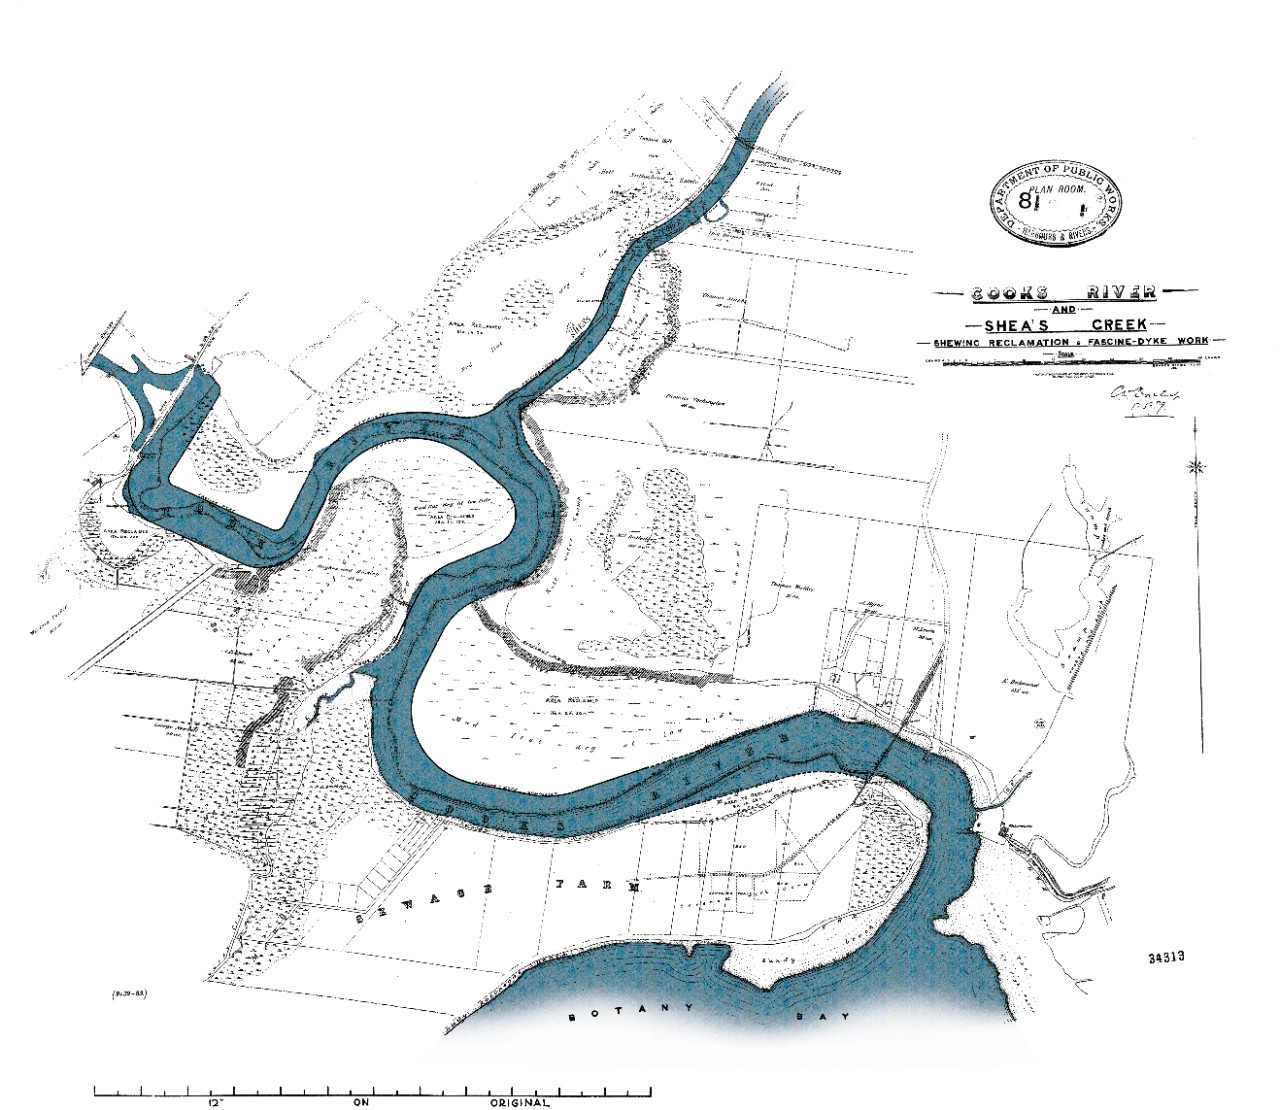 Overlay map of the Cooks River and Sheas Creek showing the straightening of the creek to turn it into Alexandria canal.